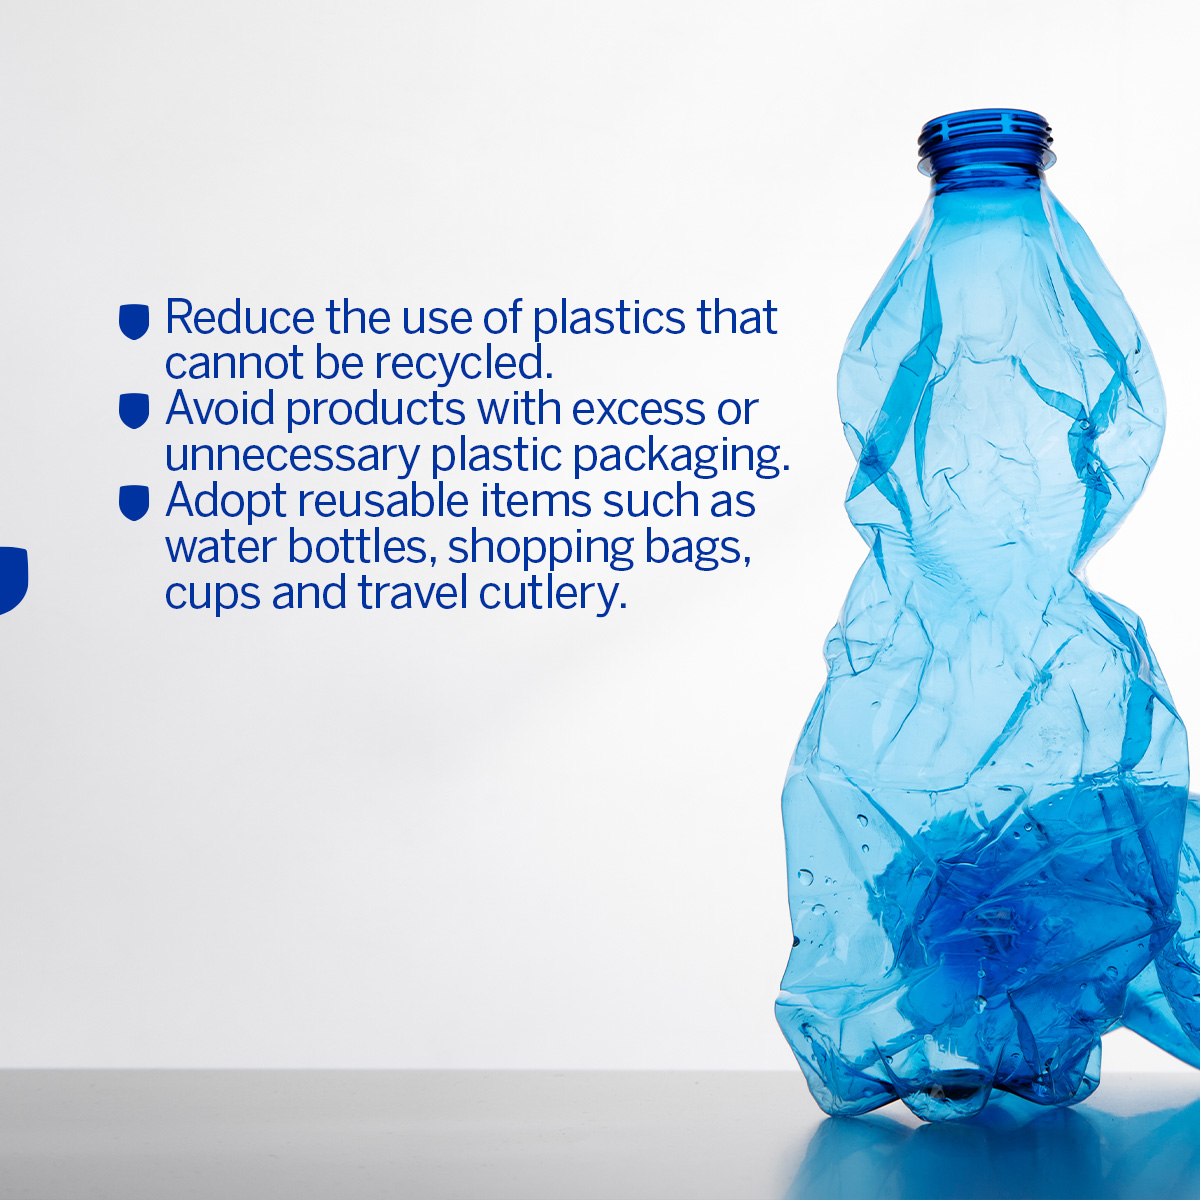 We have implemented waste segregation bins at our major offices to encourage recycling in our community. Join us in our efforts to reduce single-use plastics by following these simple tips for cutting down on plastic waste. #StanbicIBTC